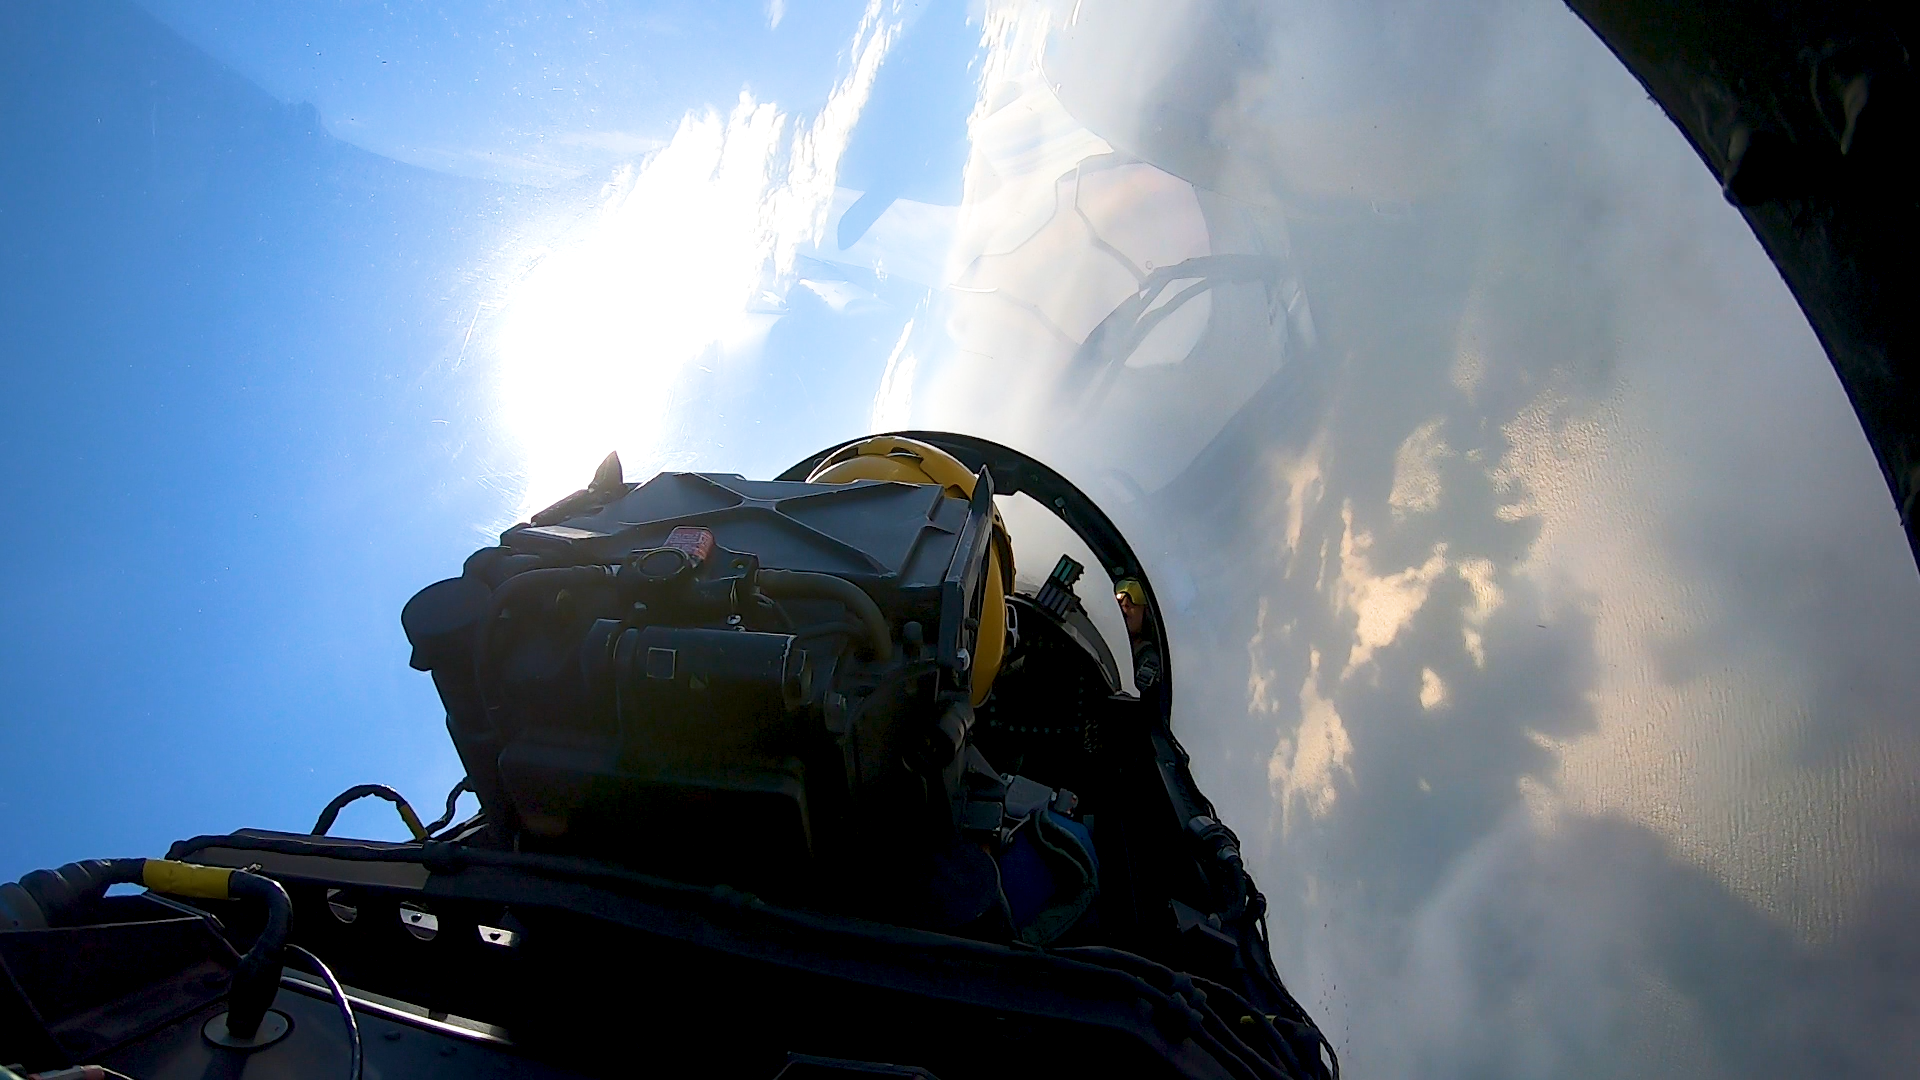 LCDR Griffin Stangel pilots his Blue Angels F-18 fighter jet over the Gulf of Mexico, as seen from the back seat. (Photo by Dusty Weis)